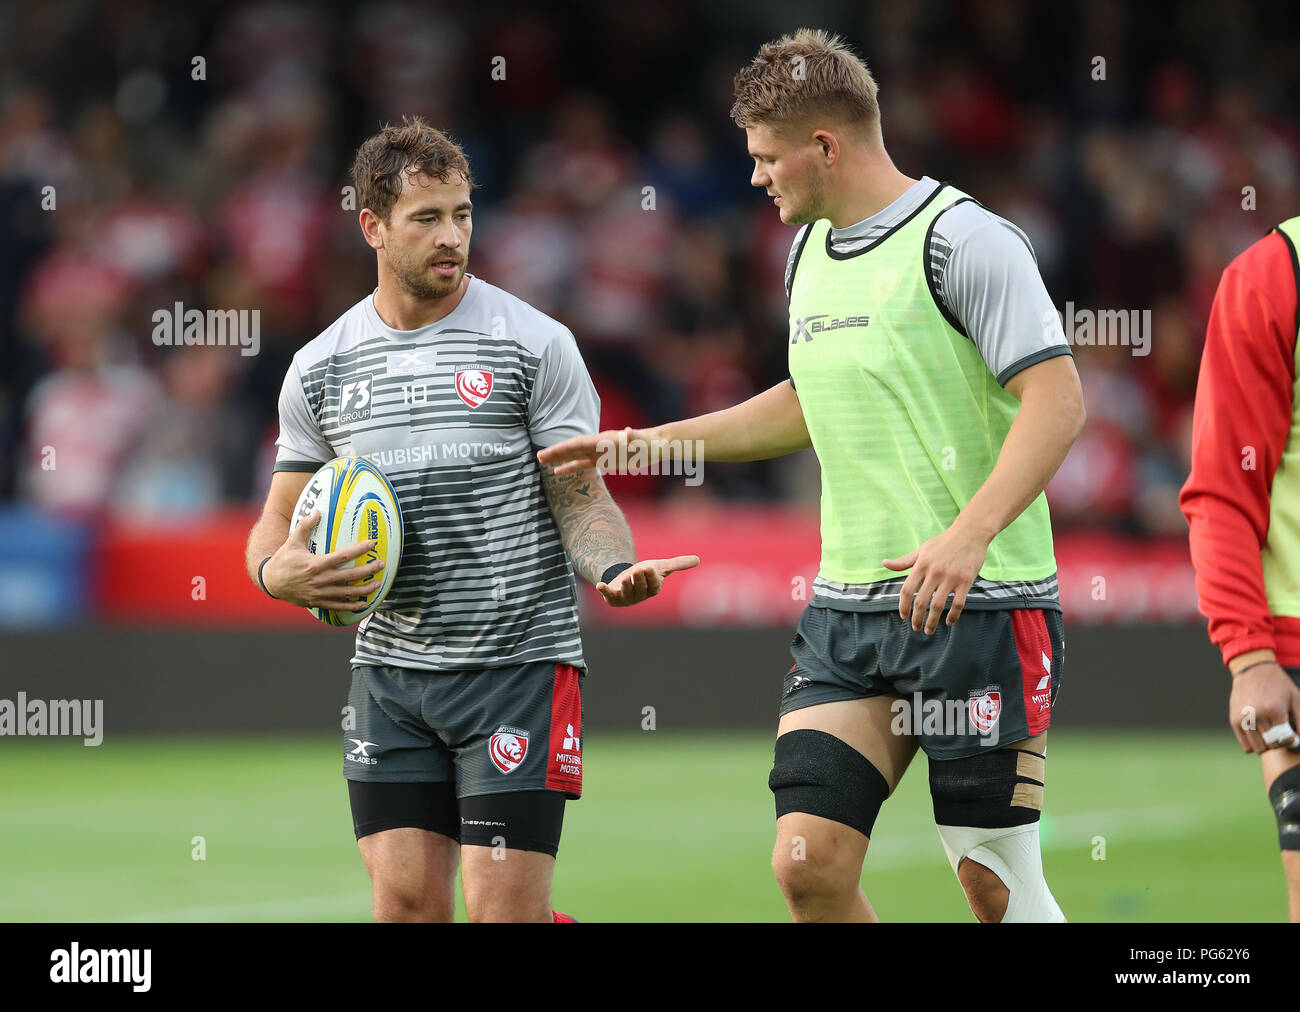 Gloucester's Danny Cipriani (left) warms up before the pre-season friendly match at Kingsholm Stadium, Gloucester. Stock Photo